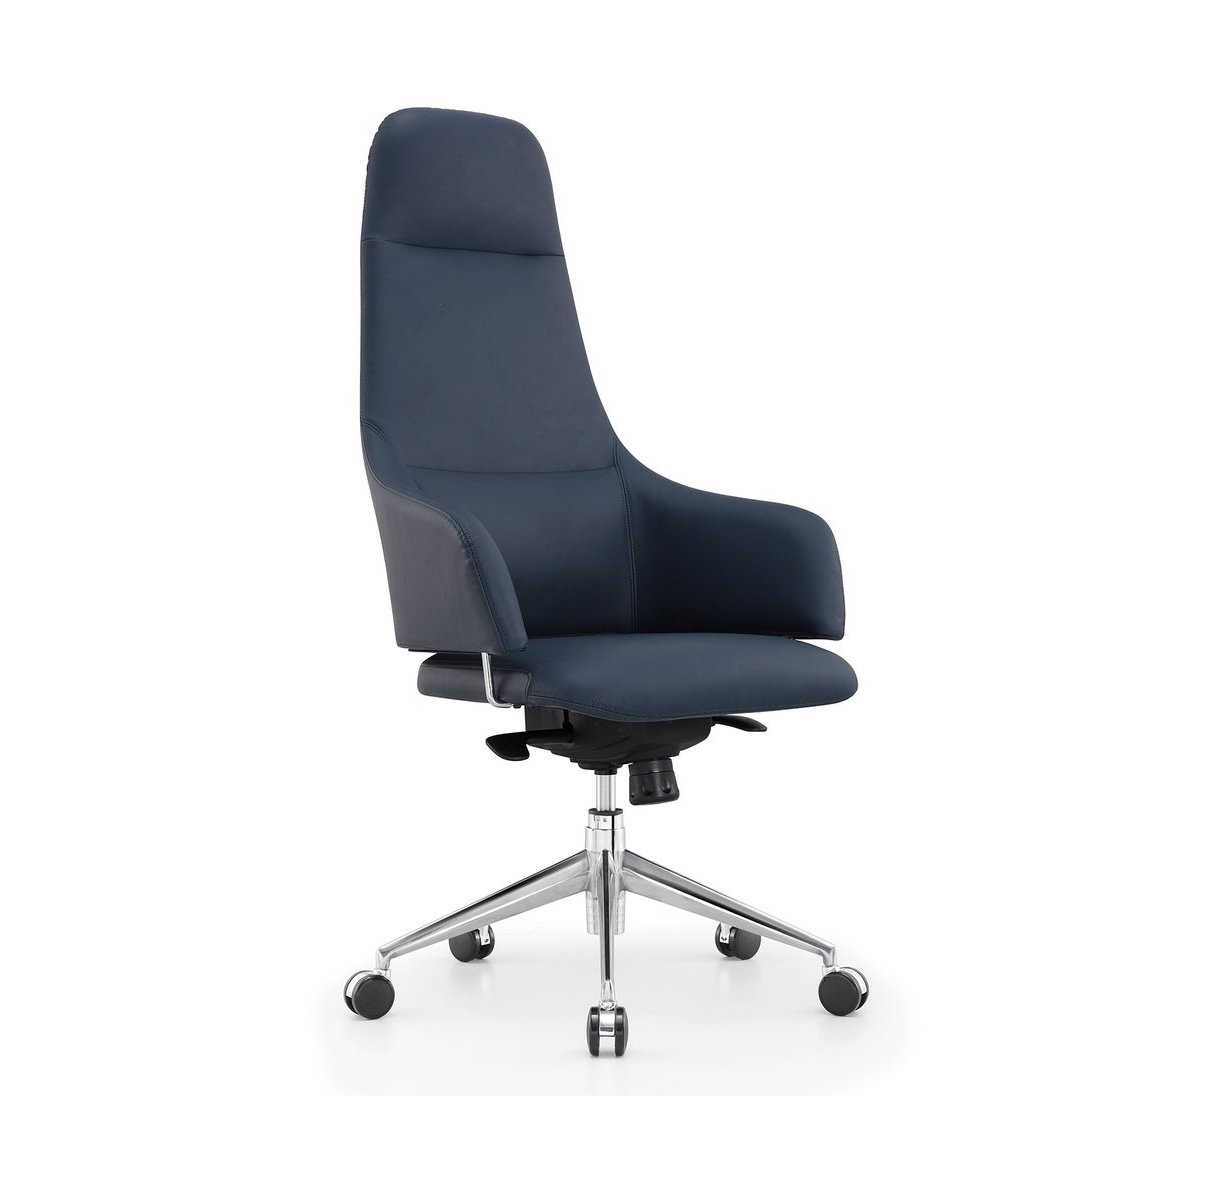 Canton high back management chair Furniture-Office-Office Chairs